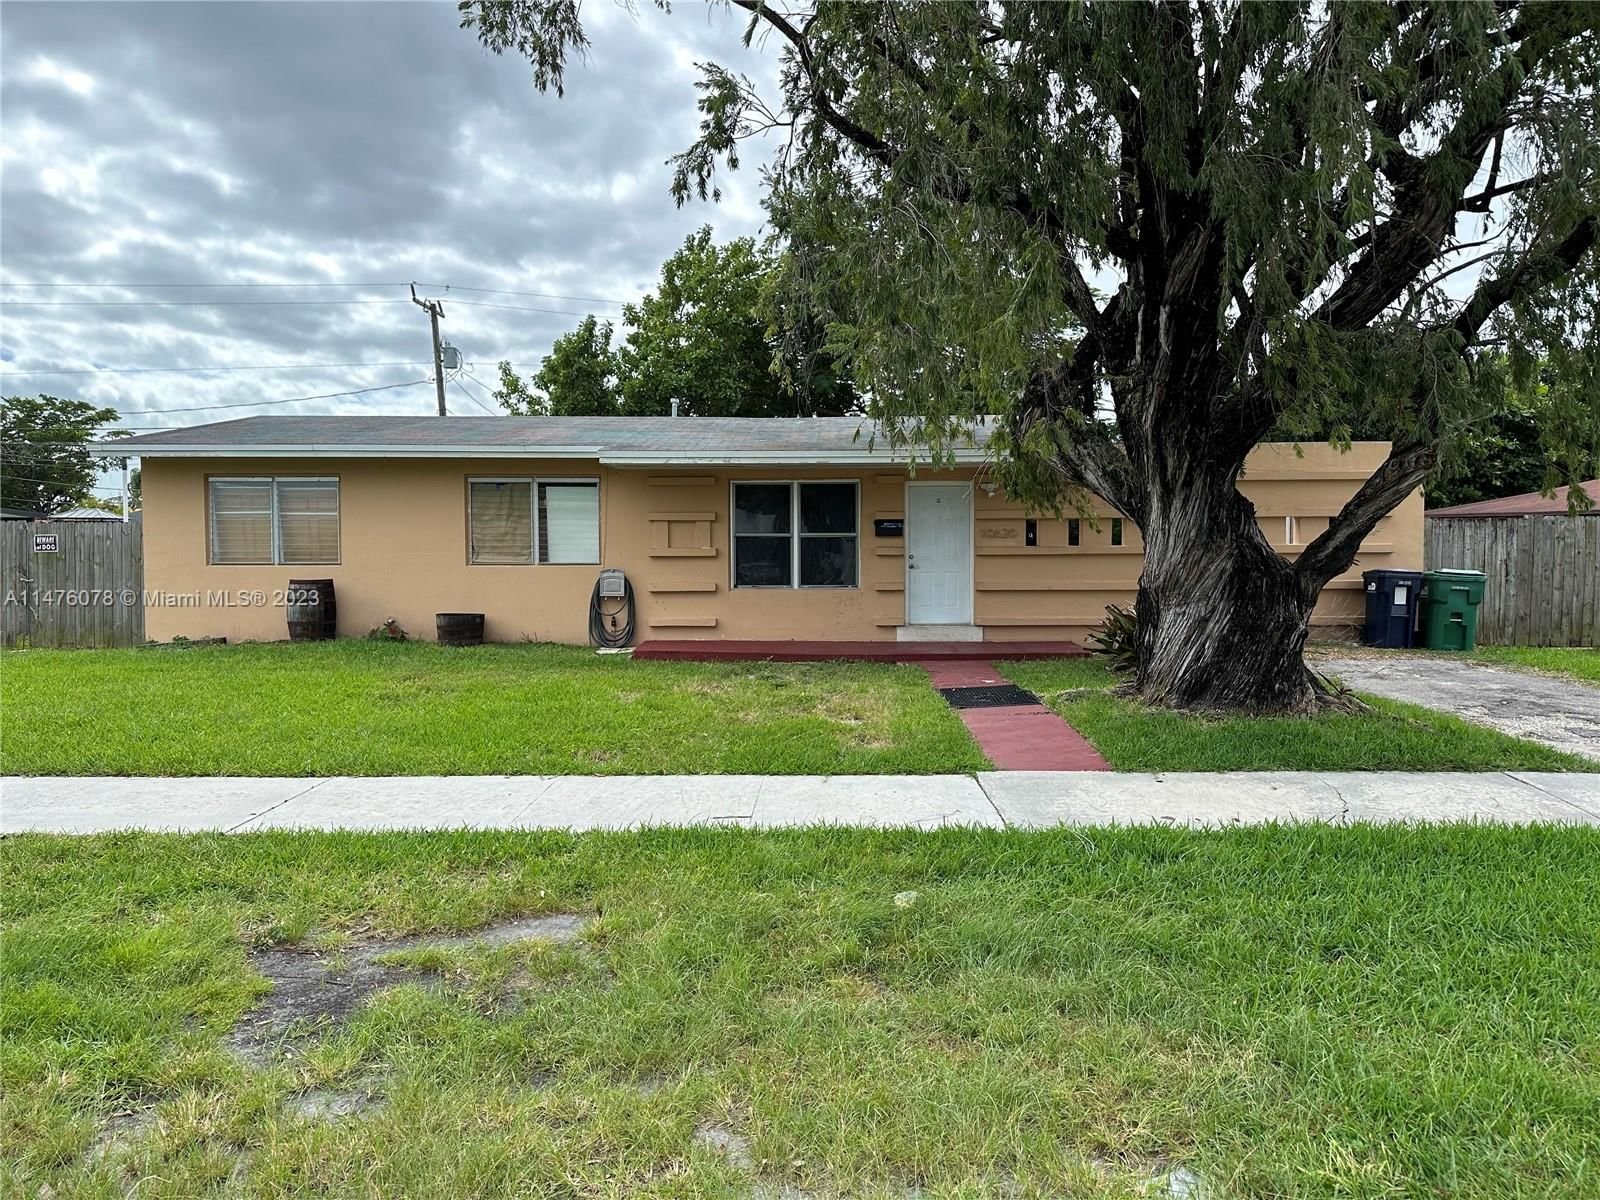 Real estate property located at 10620 200th St, Miami-Dade County, Cutler Bay, FL